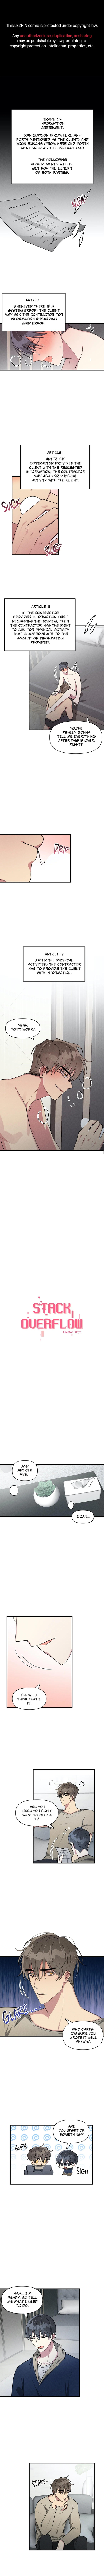 Stack Overflow Chapter 53 - Picture 1